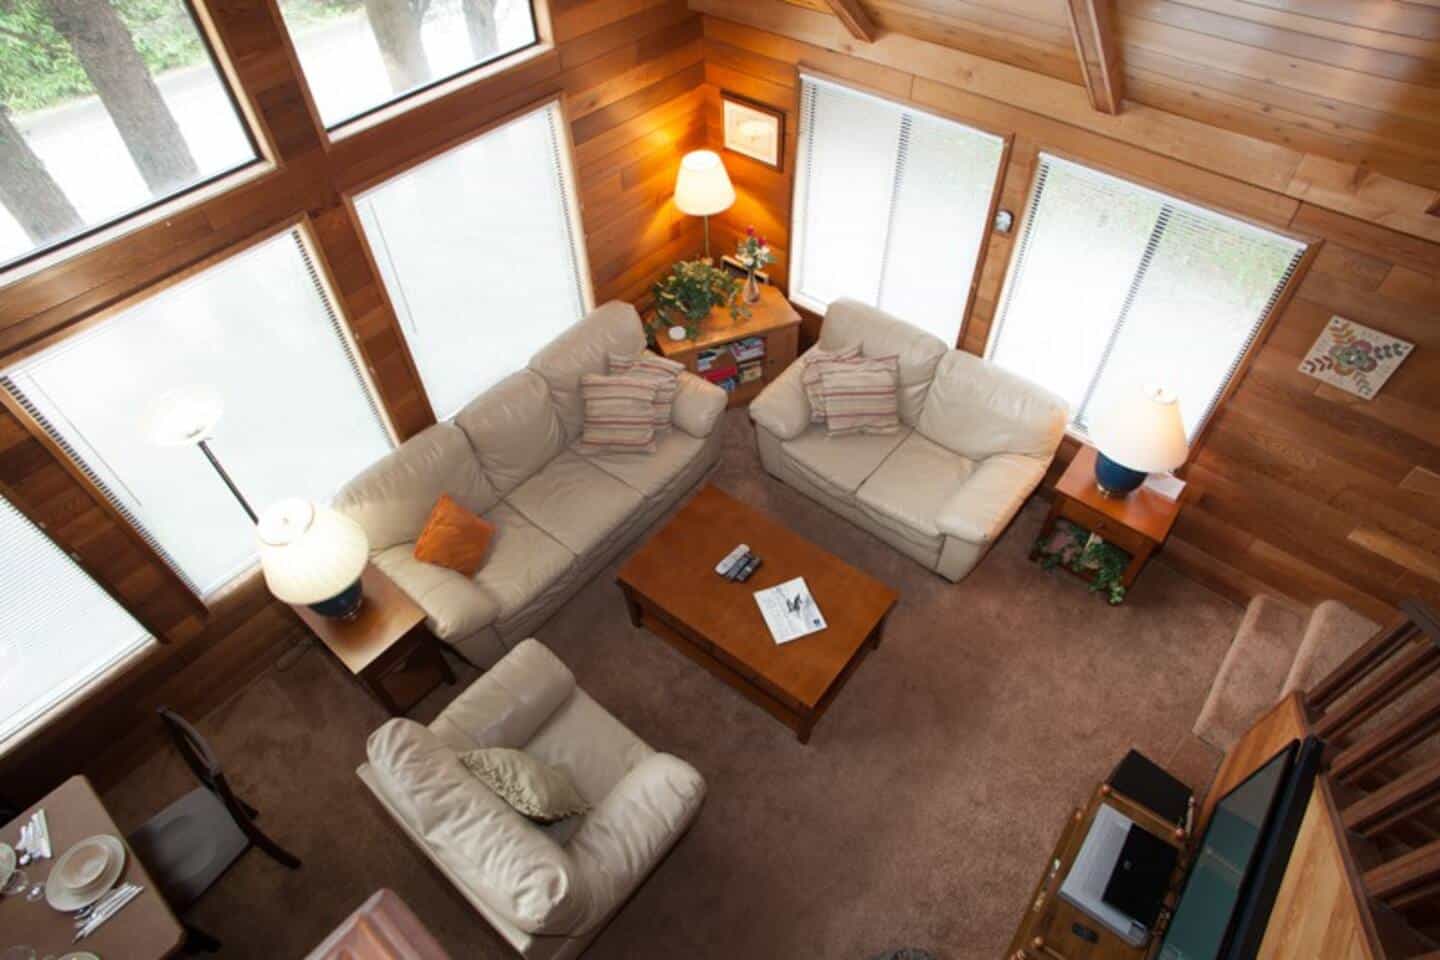 Image of Airbnb rental in Cannon Beach